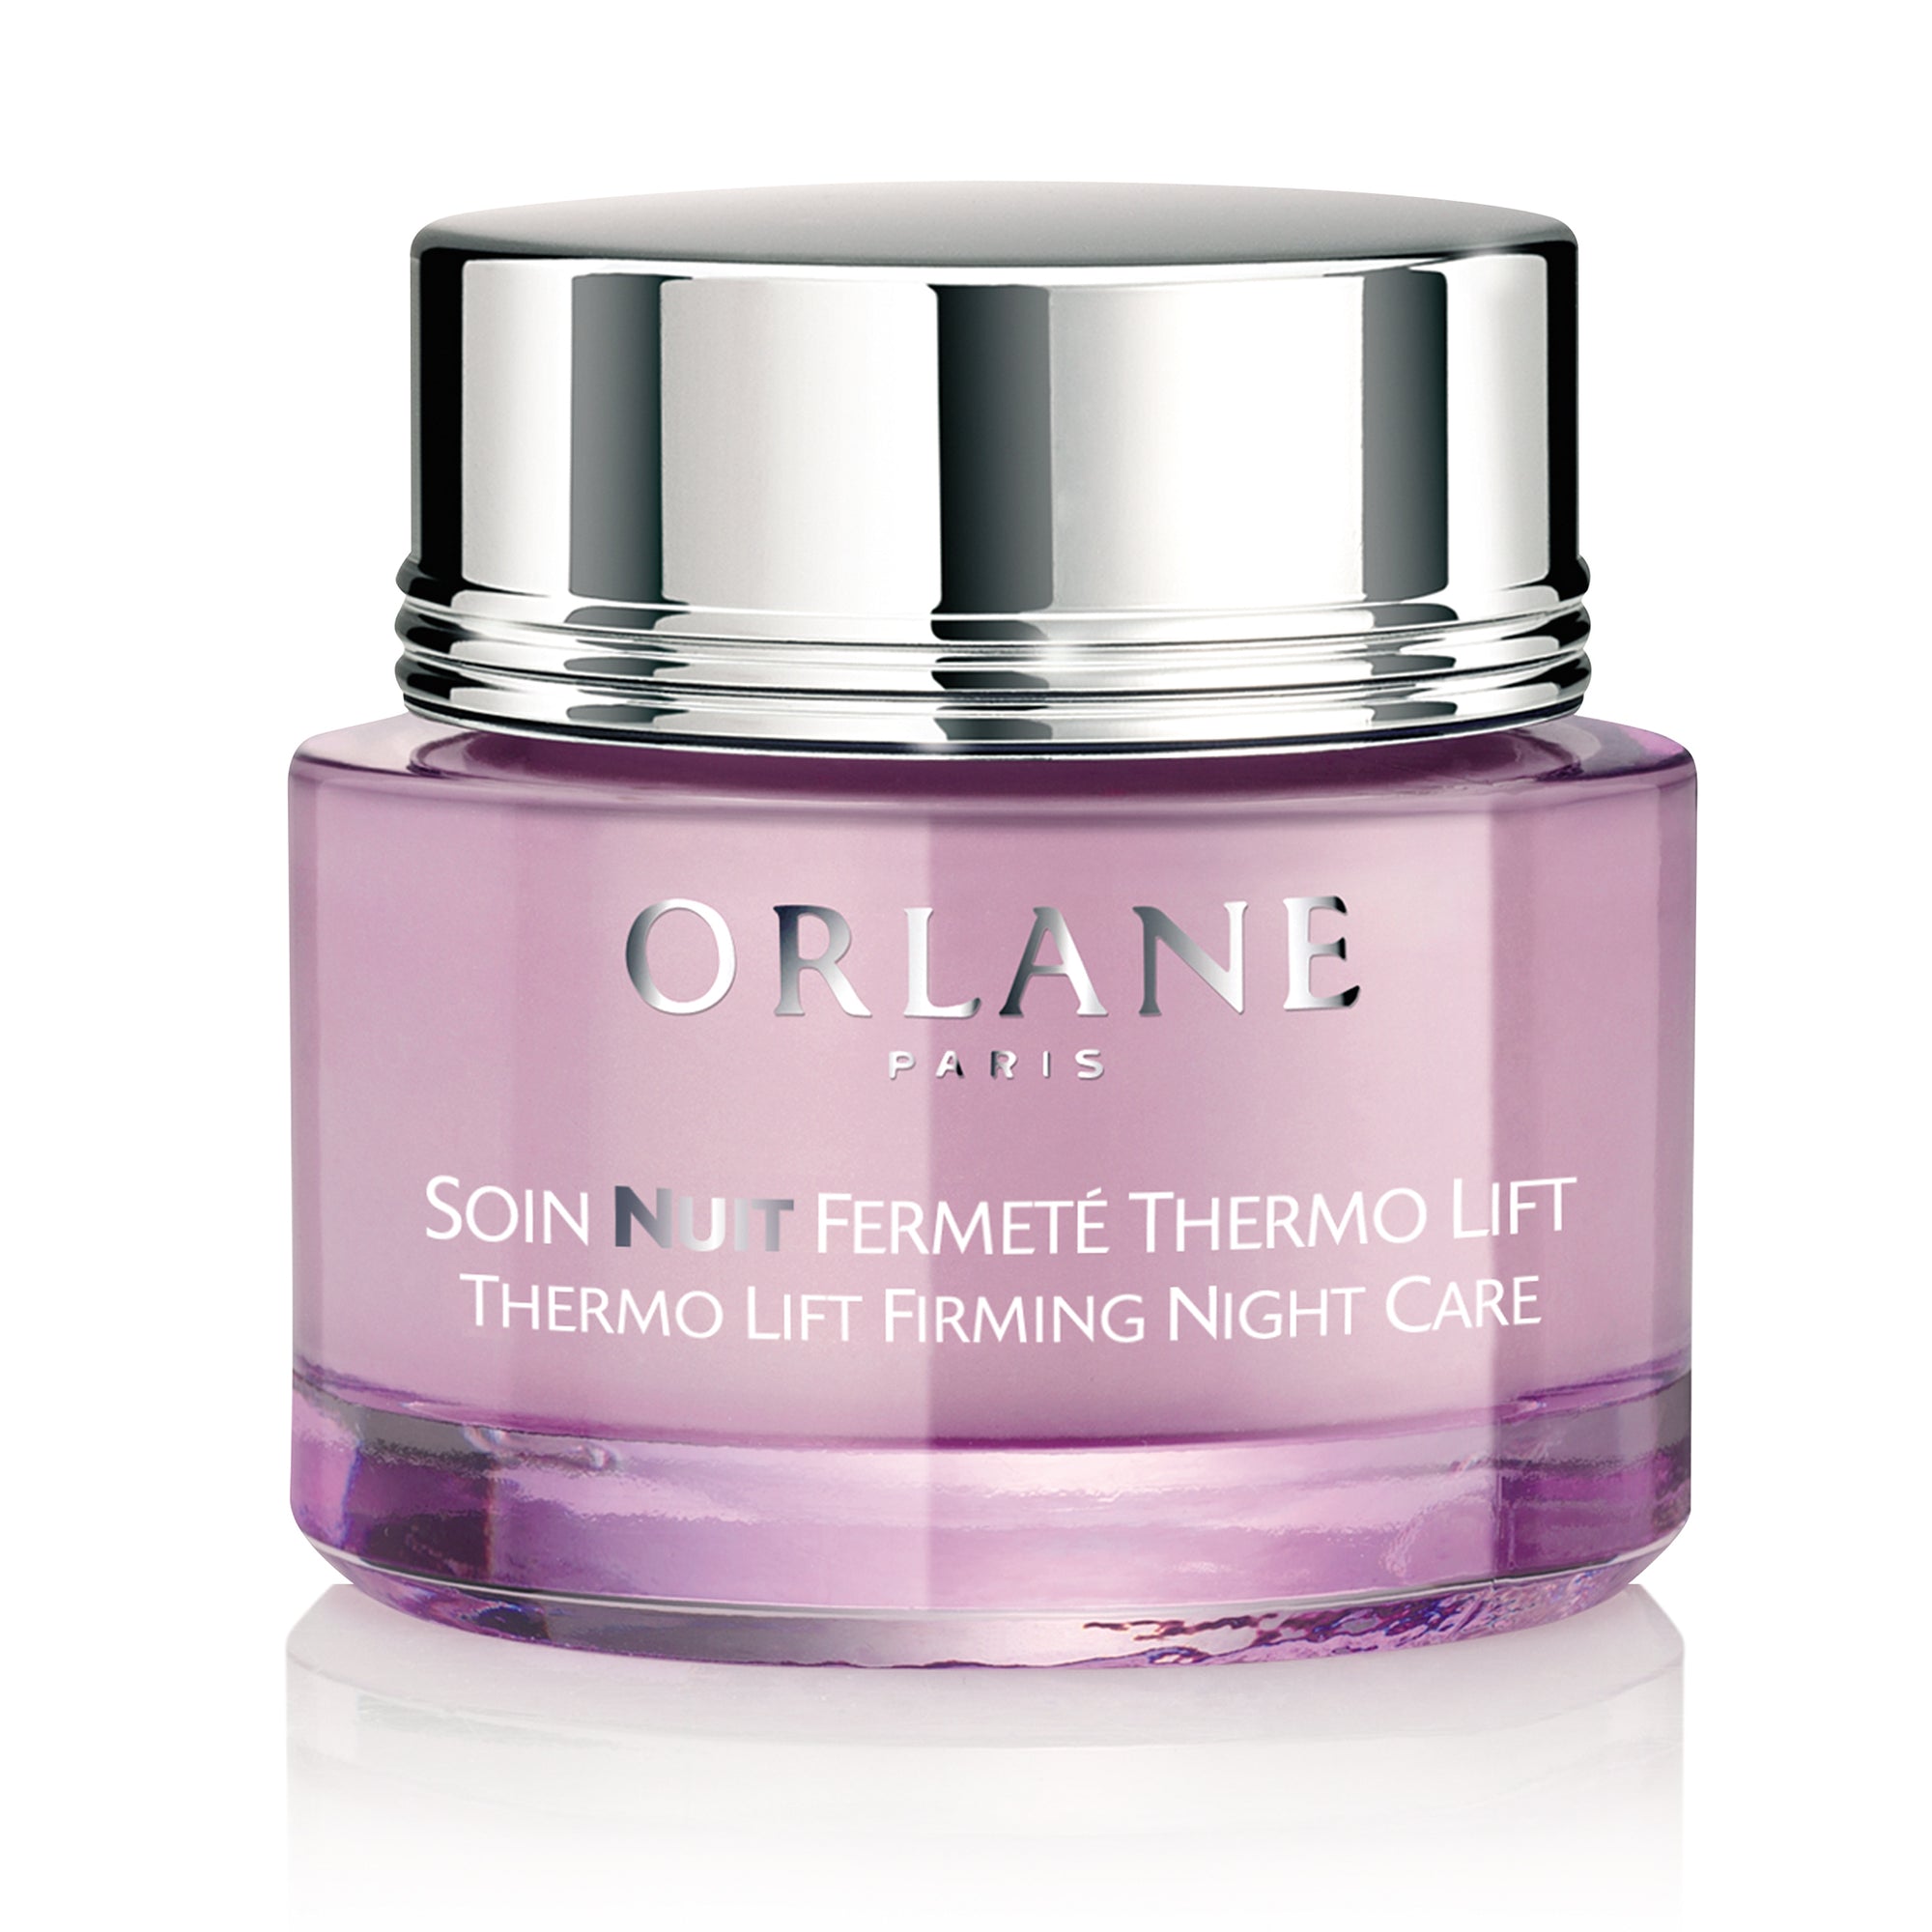 Orlane Thermo Lift Firming Night Care